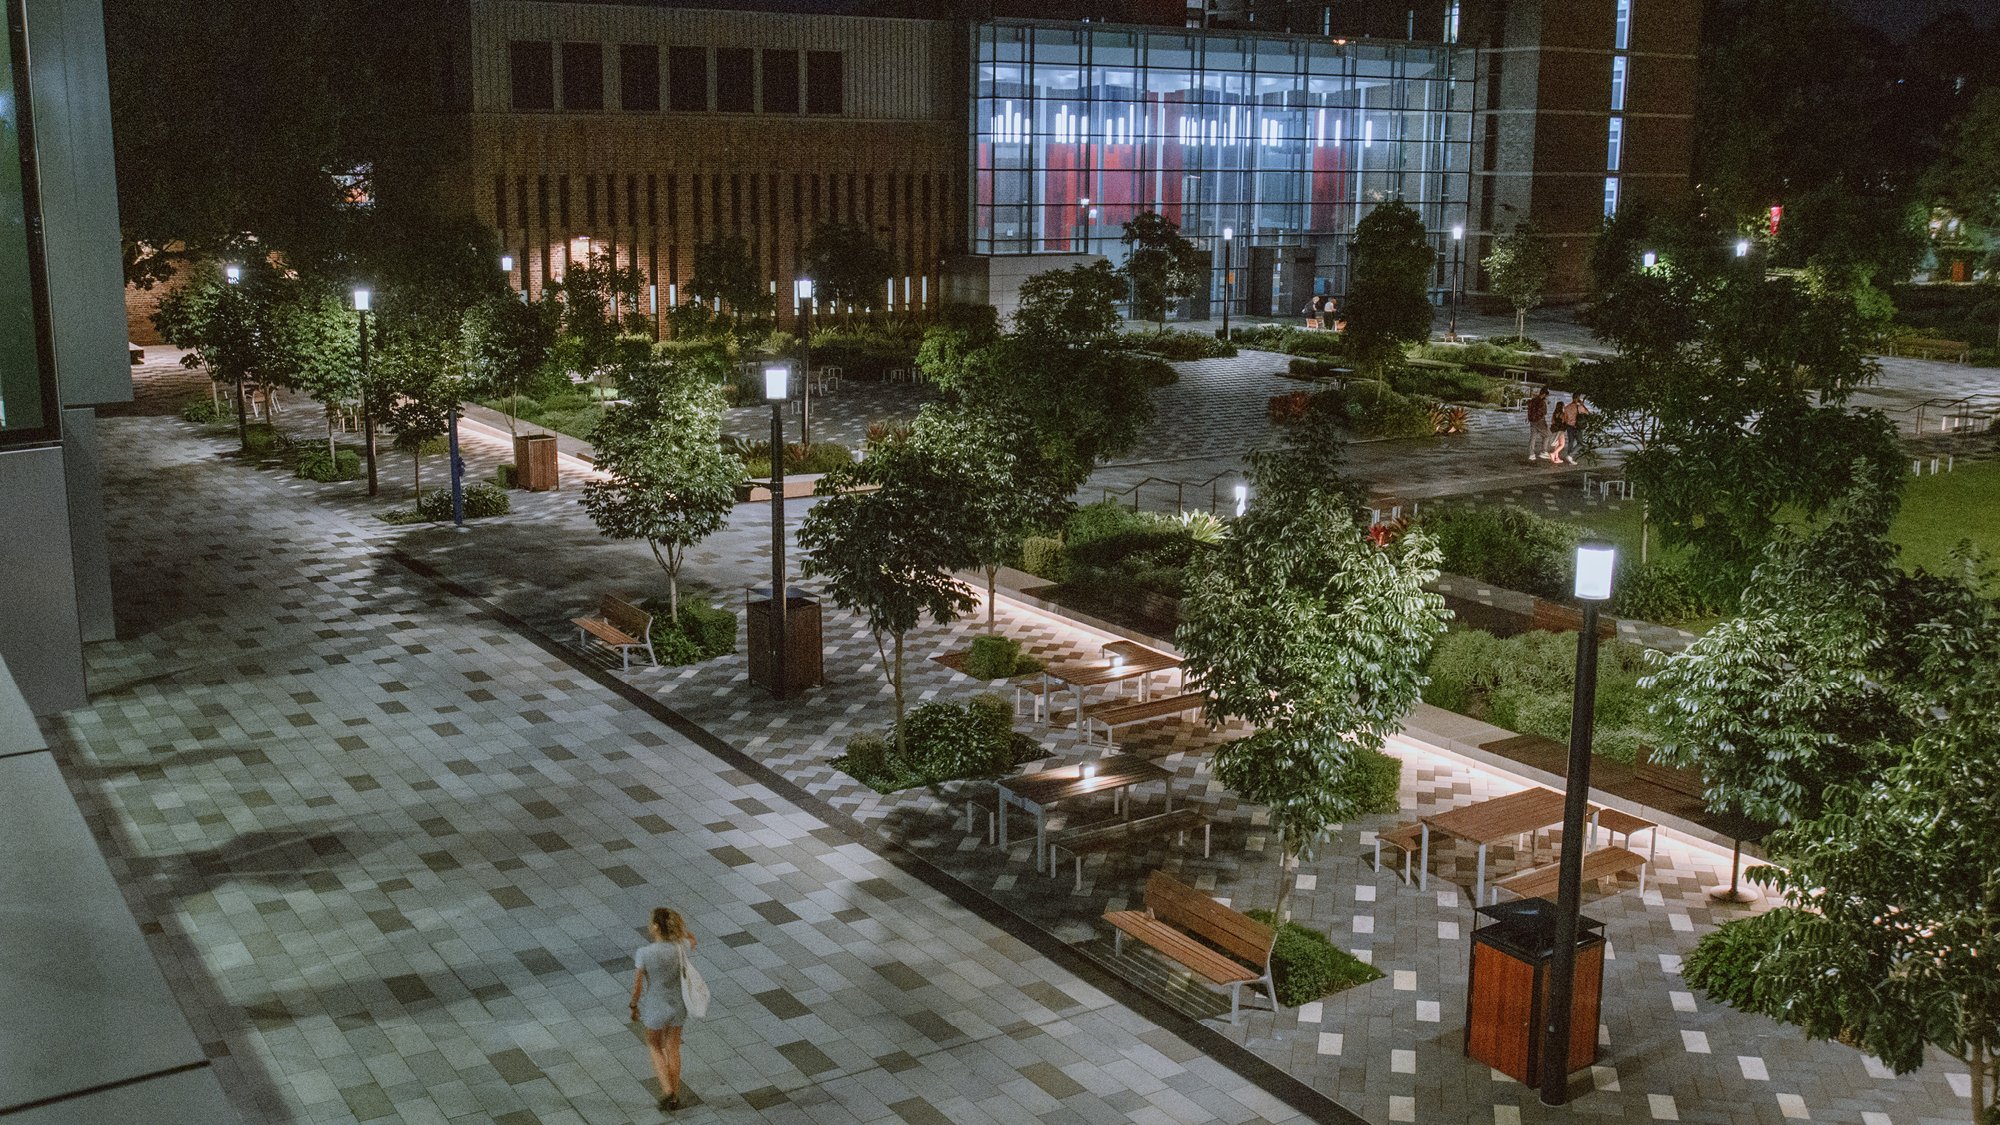 Woman walking through a large courtyard with trees and seating at night